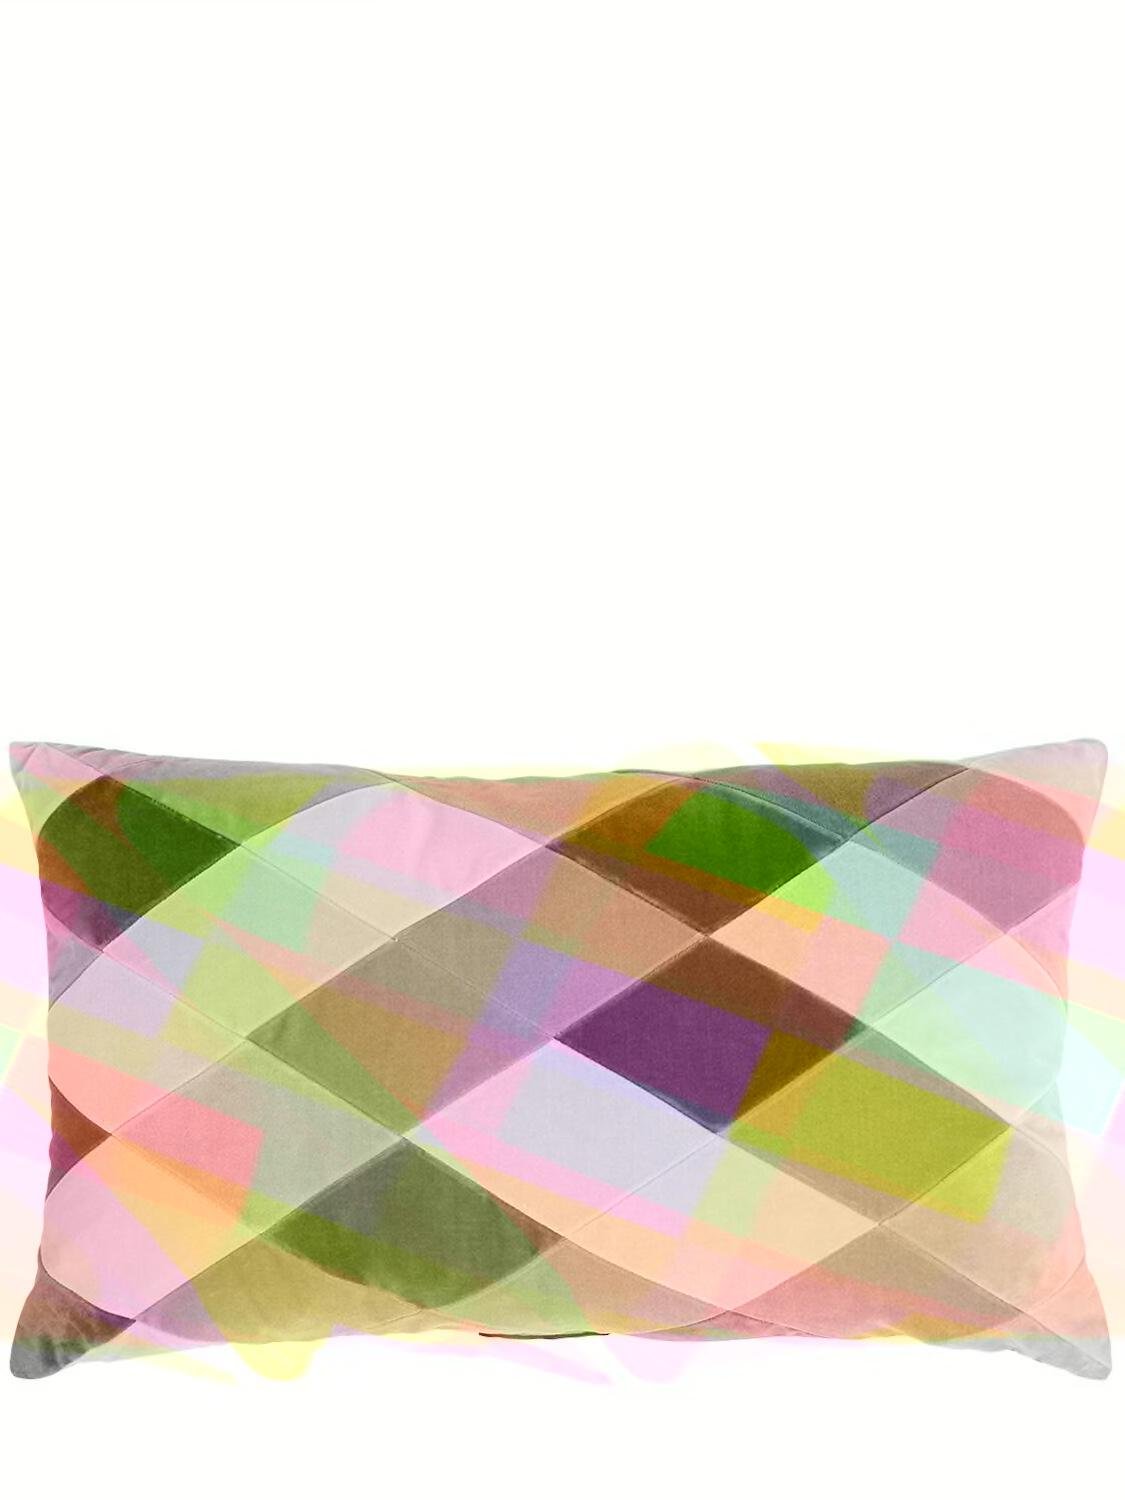 Emma Cotton Cushion by CHRISTINA LUNDSTEEN